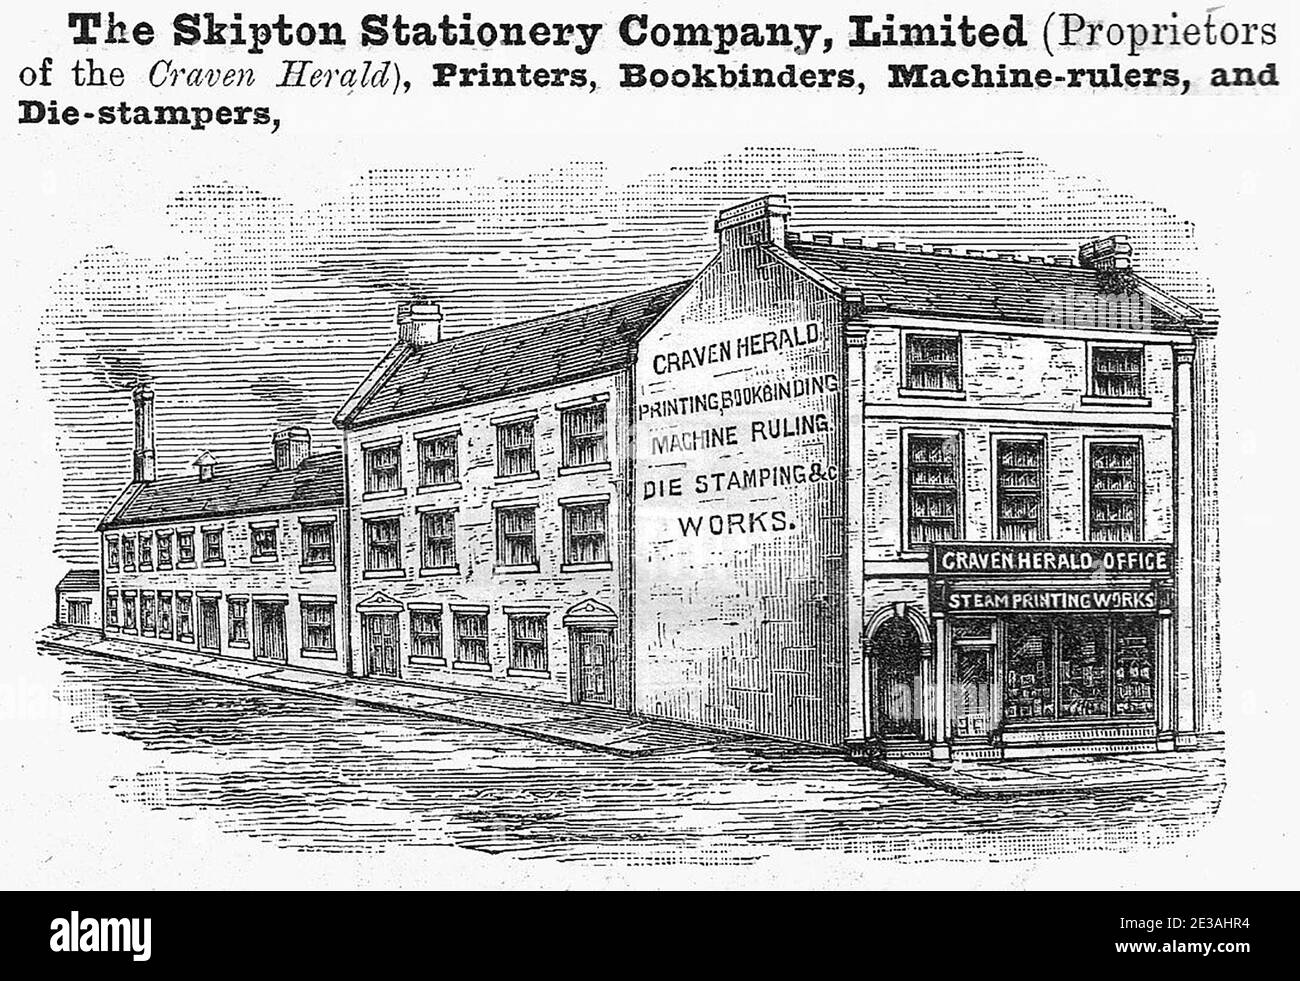 THE SKIPTON STATIONERY COMPANY, LIMITED (PROPRIETORS OF THE “CRAVEN HERALD”), PRINTERS, BOOKBINDERS, MACHINE-RULERS, AND DIE-STAMPERS, 38 HIGH STREET, SKIPTON, Yorkshire, UK. An etching, engraving or lithograph from the Victorian Era. Stock Photo